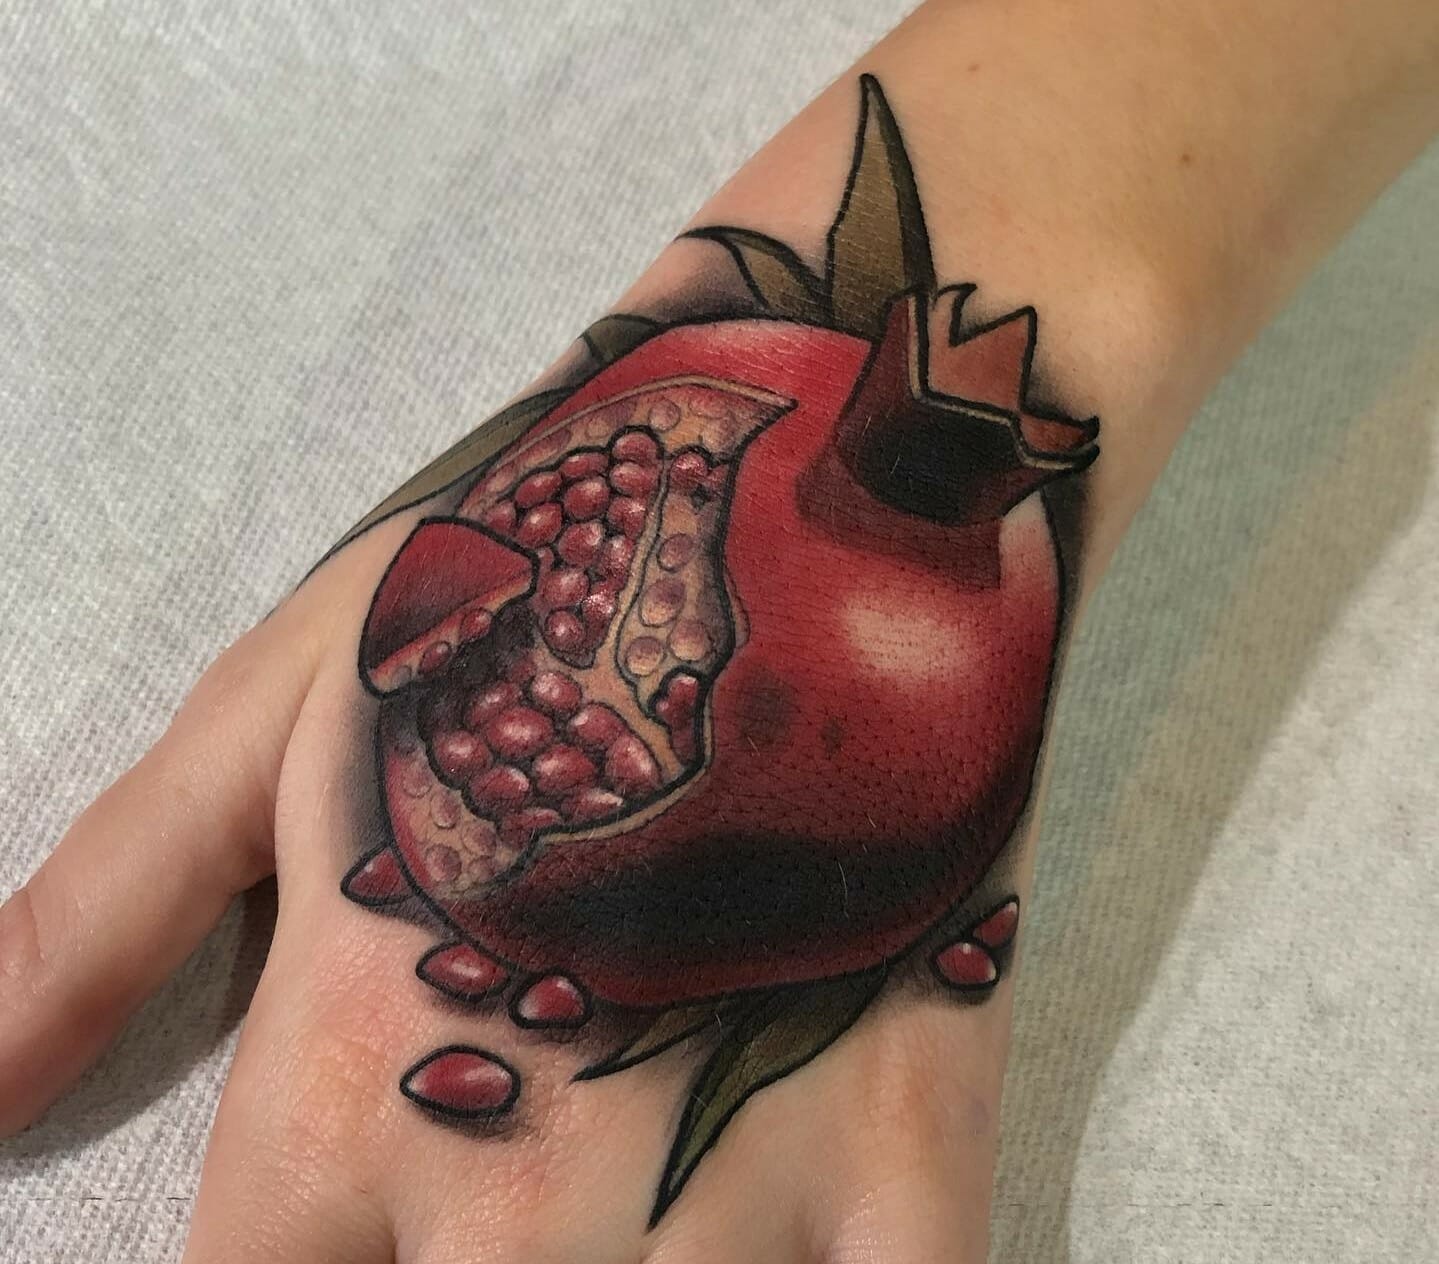 11+ Bad Apple Tattoo Ideas You'll Have To See To Believe! - alexie